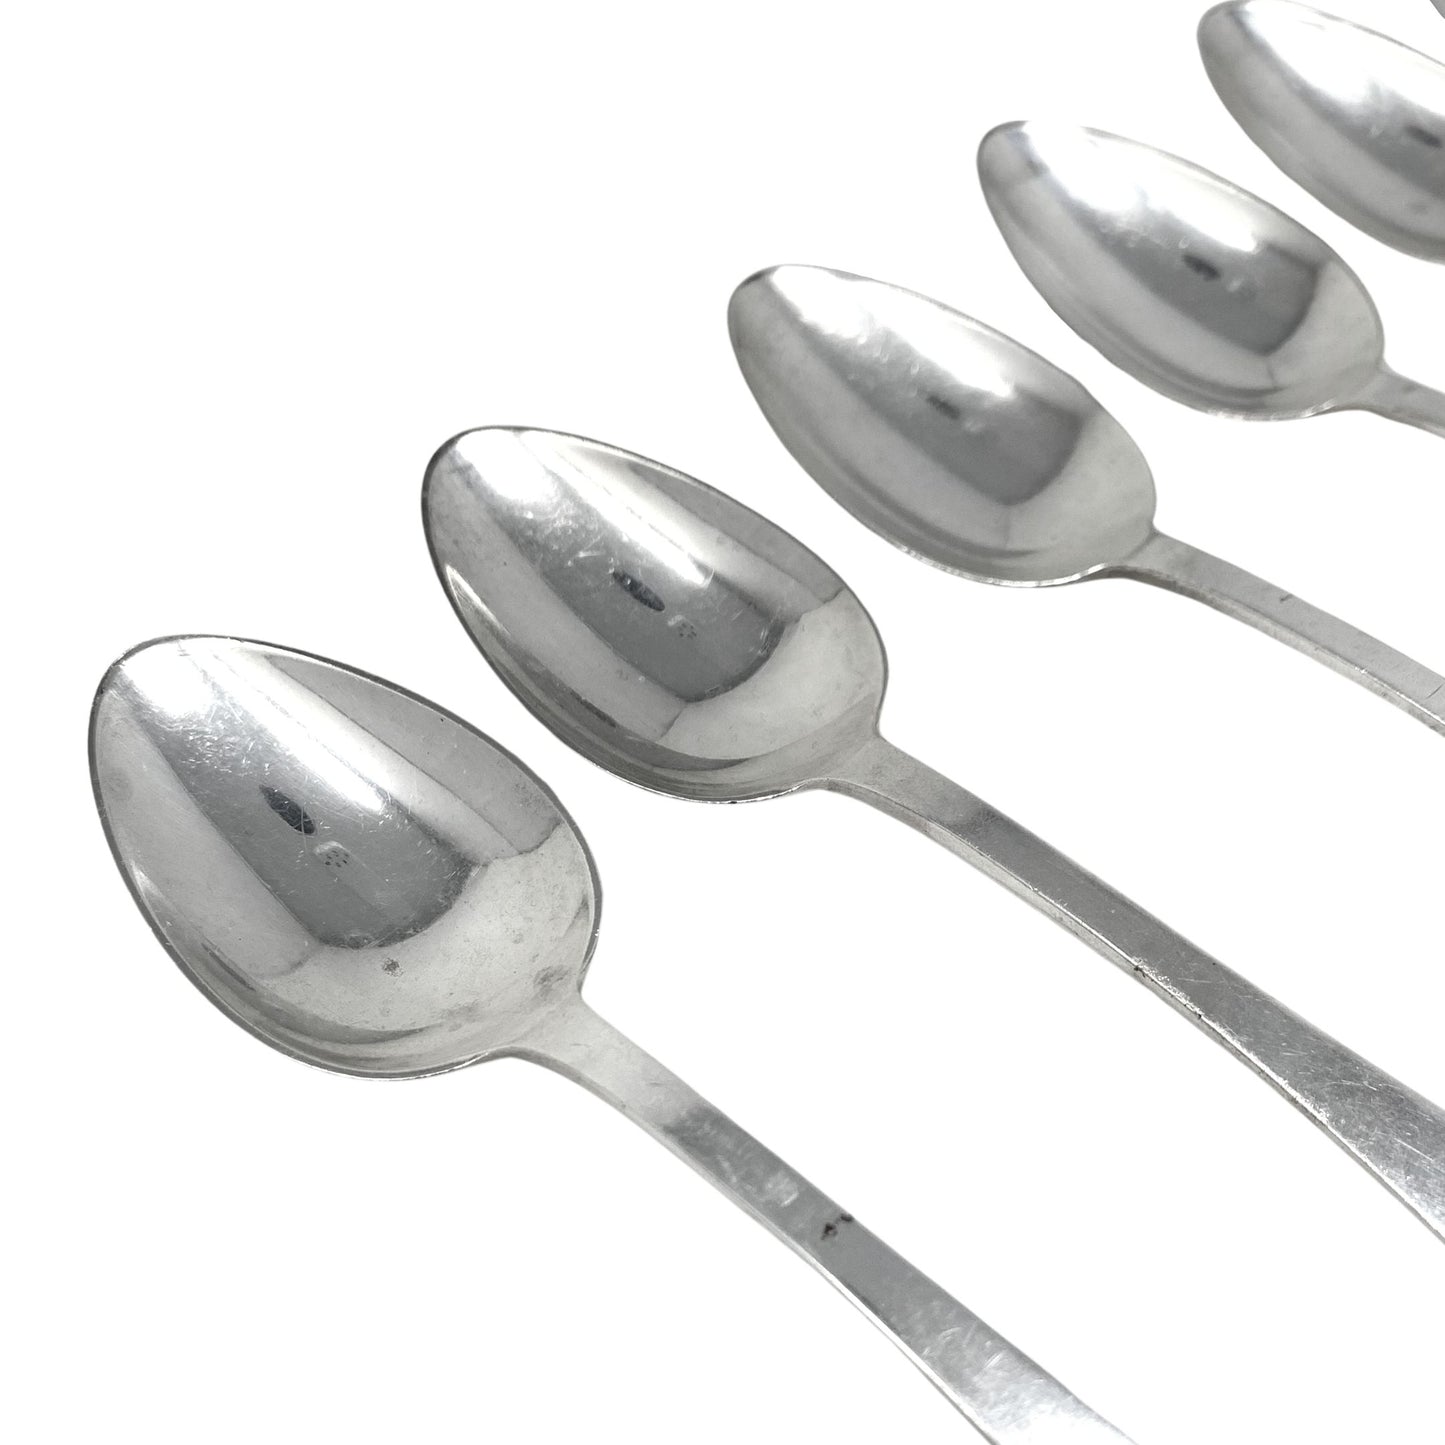 Tiffany Sterling “Faneuil” Monogrammed Tea Spoons (6)